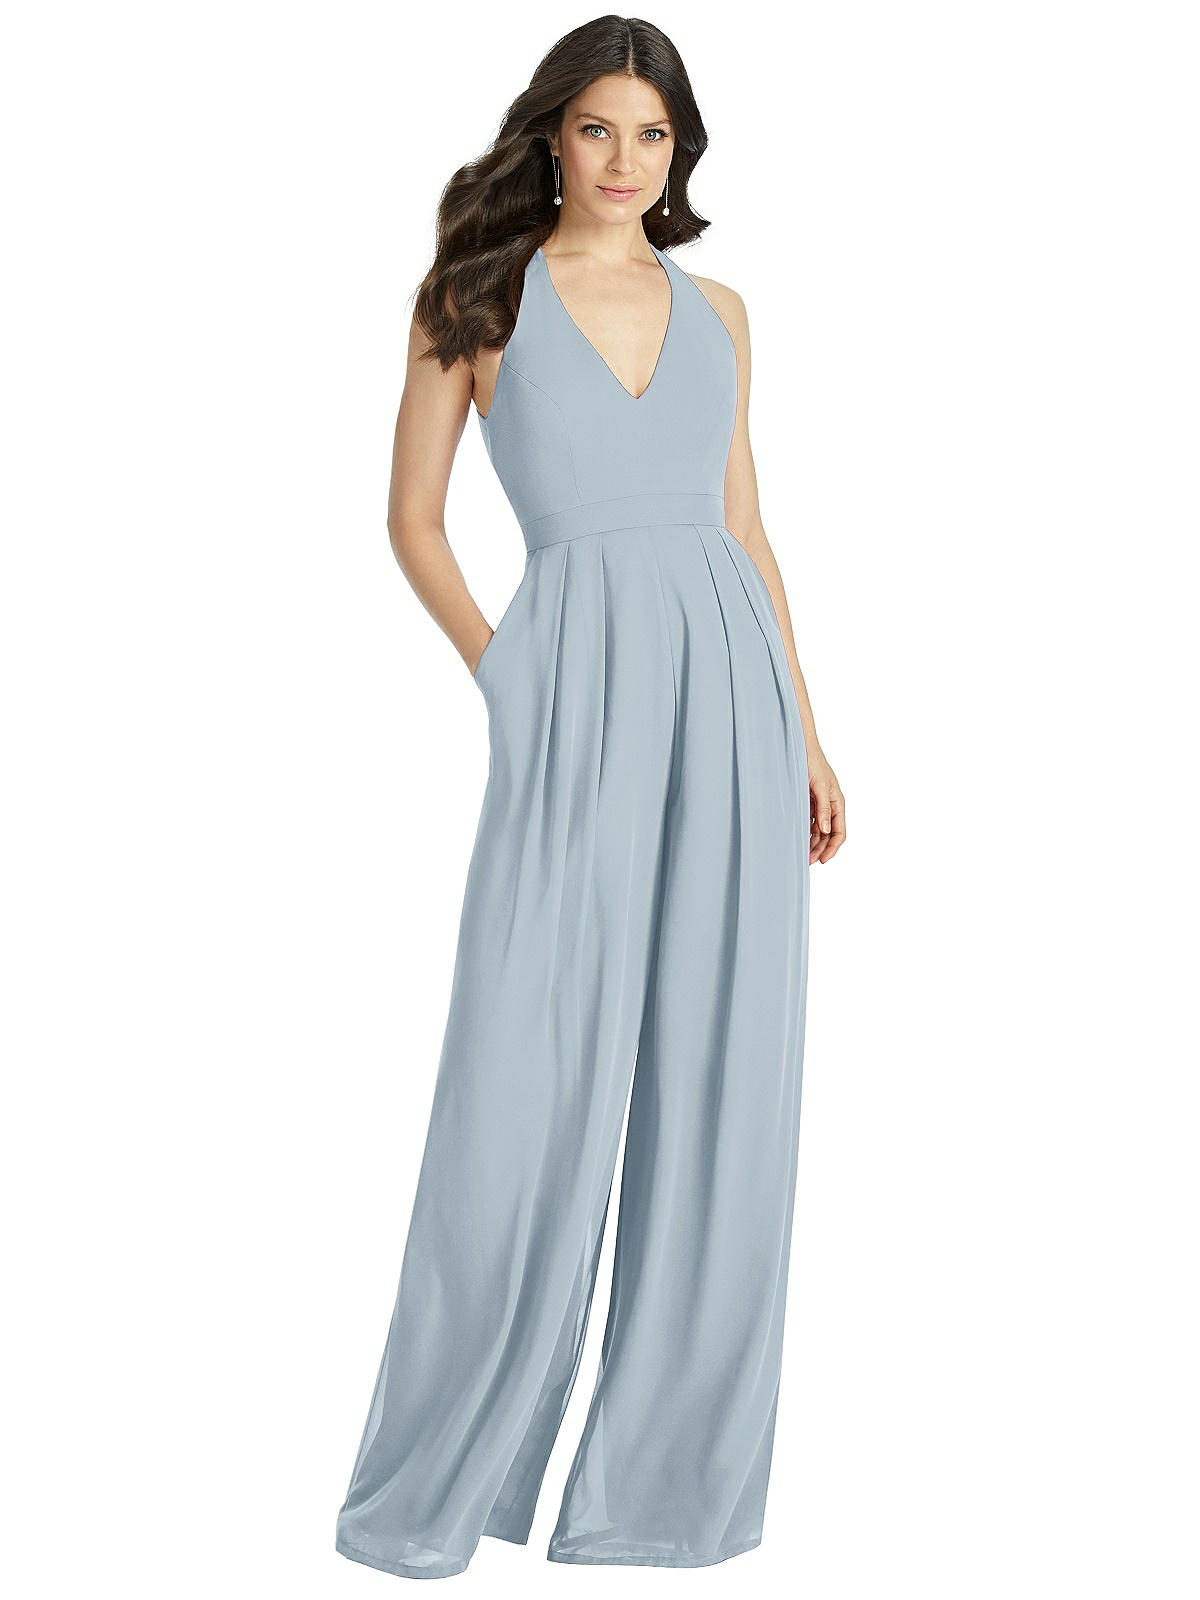 V-Neck Backless Pleated Front Jumpsuit - Arielle | The Dessy Group